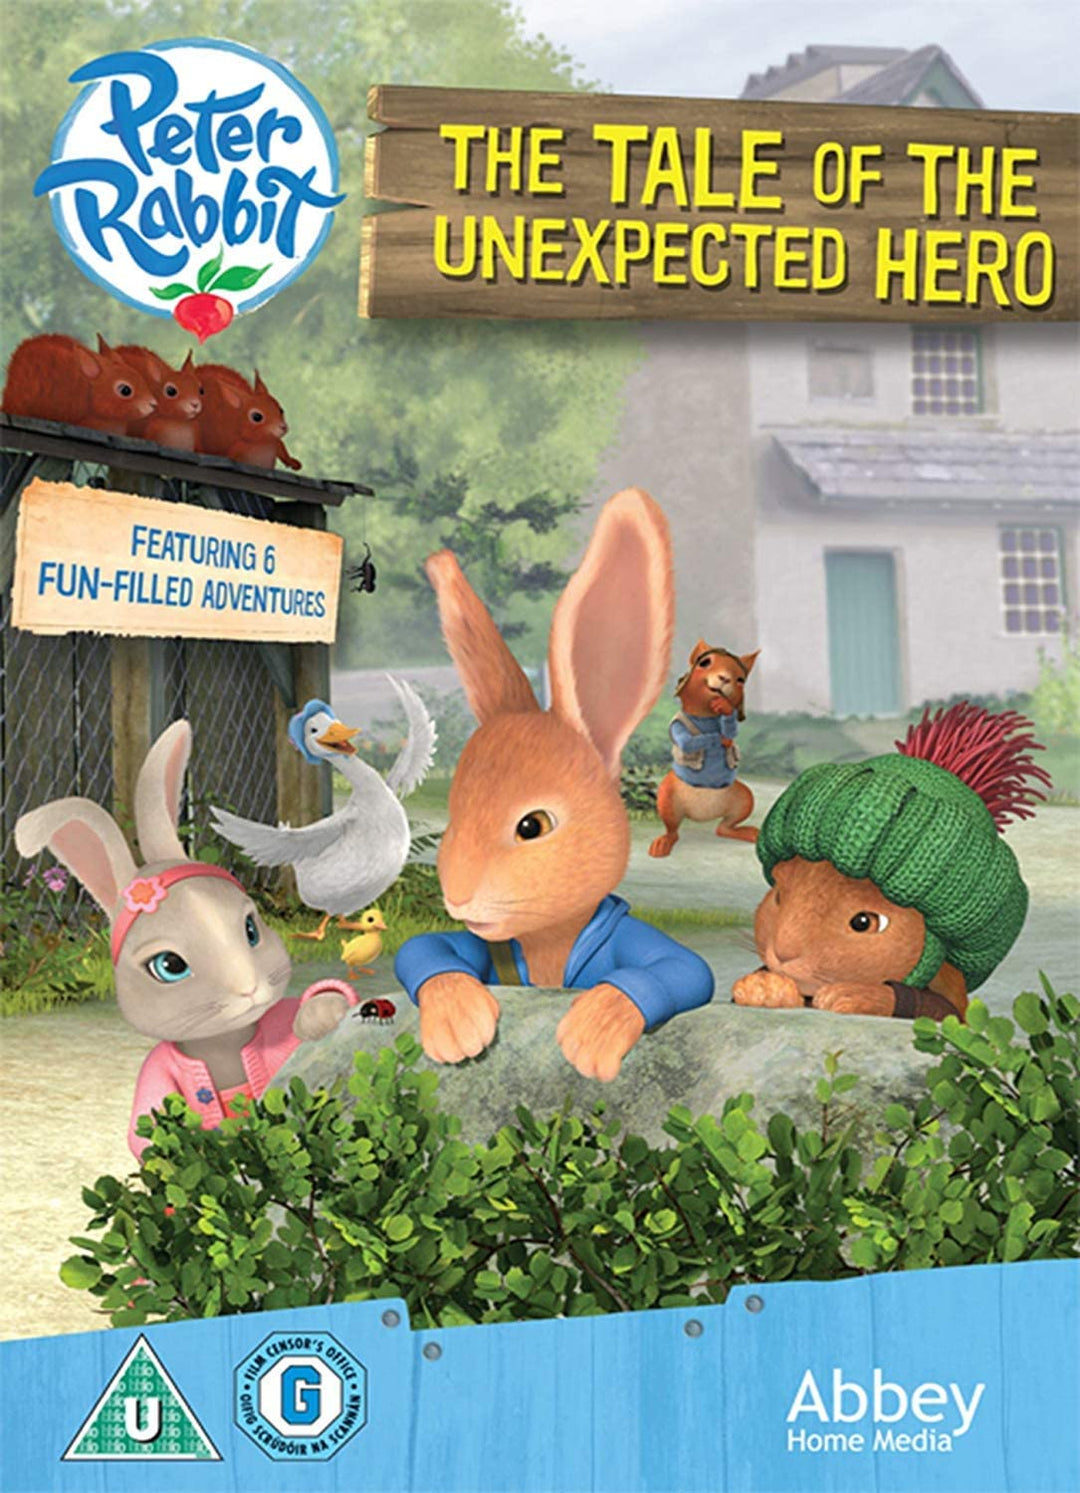 Peter Rabbit: The Tale Of The Unexpected Hero